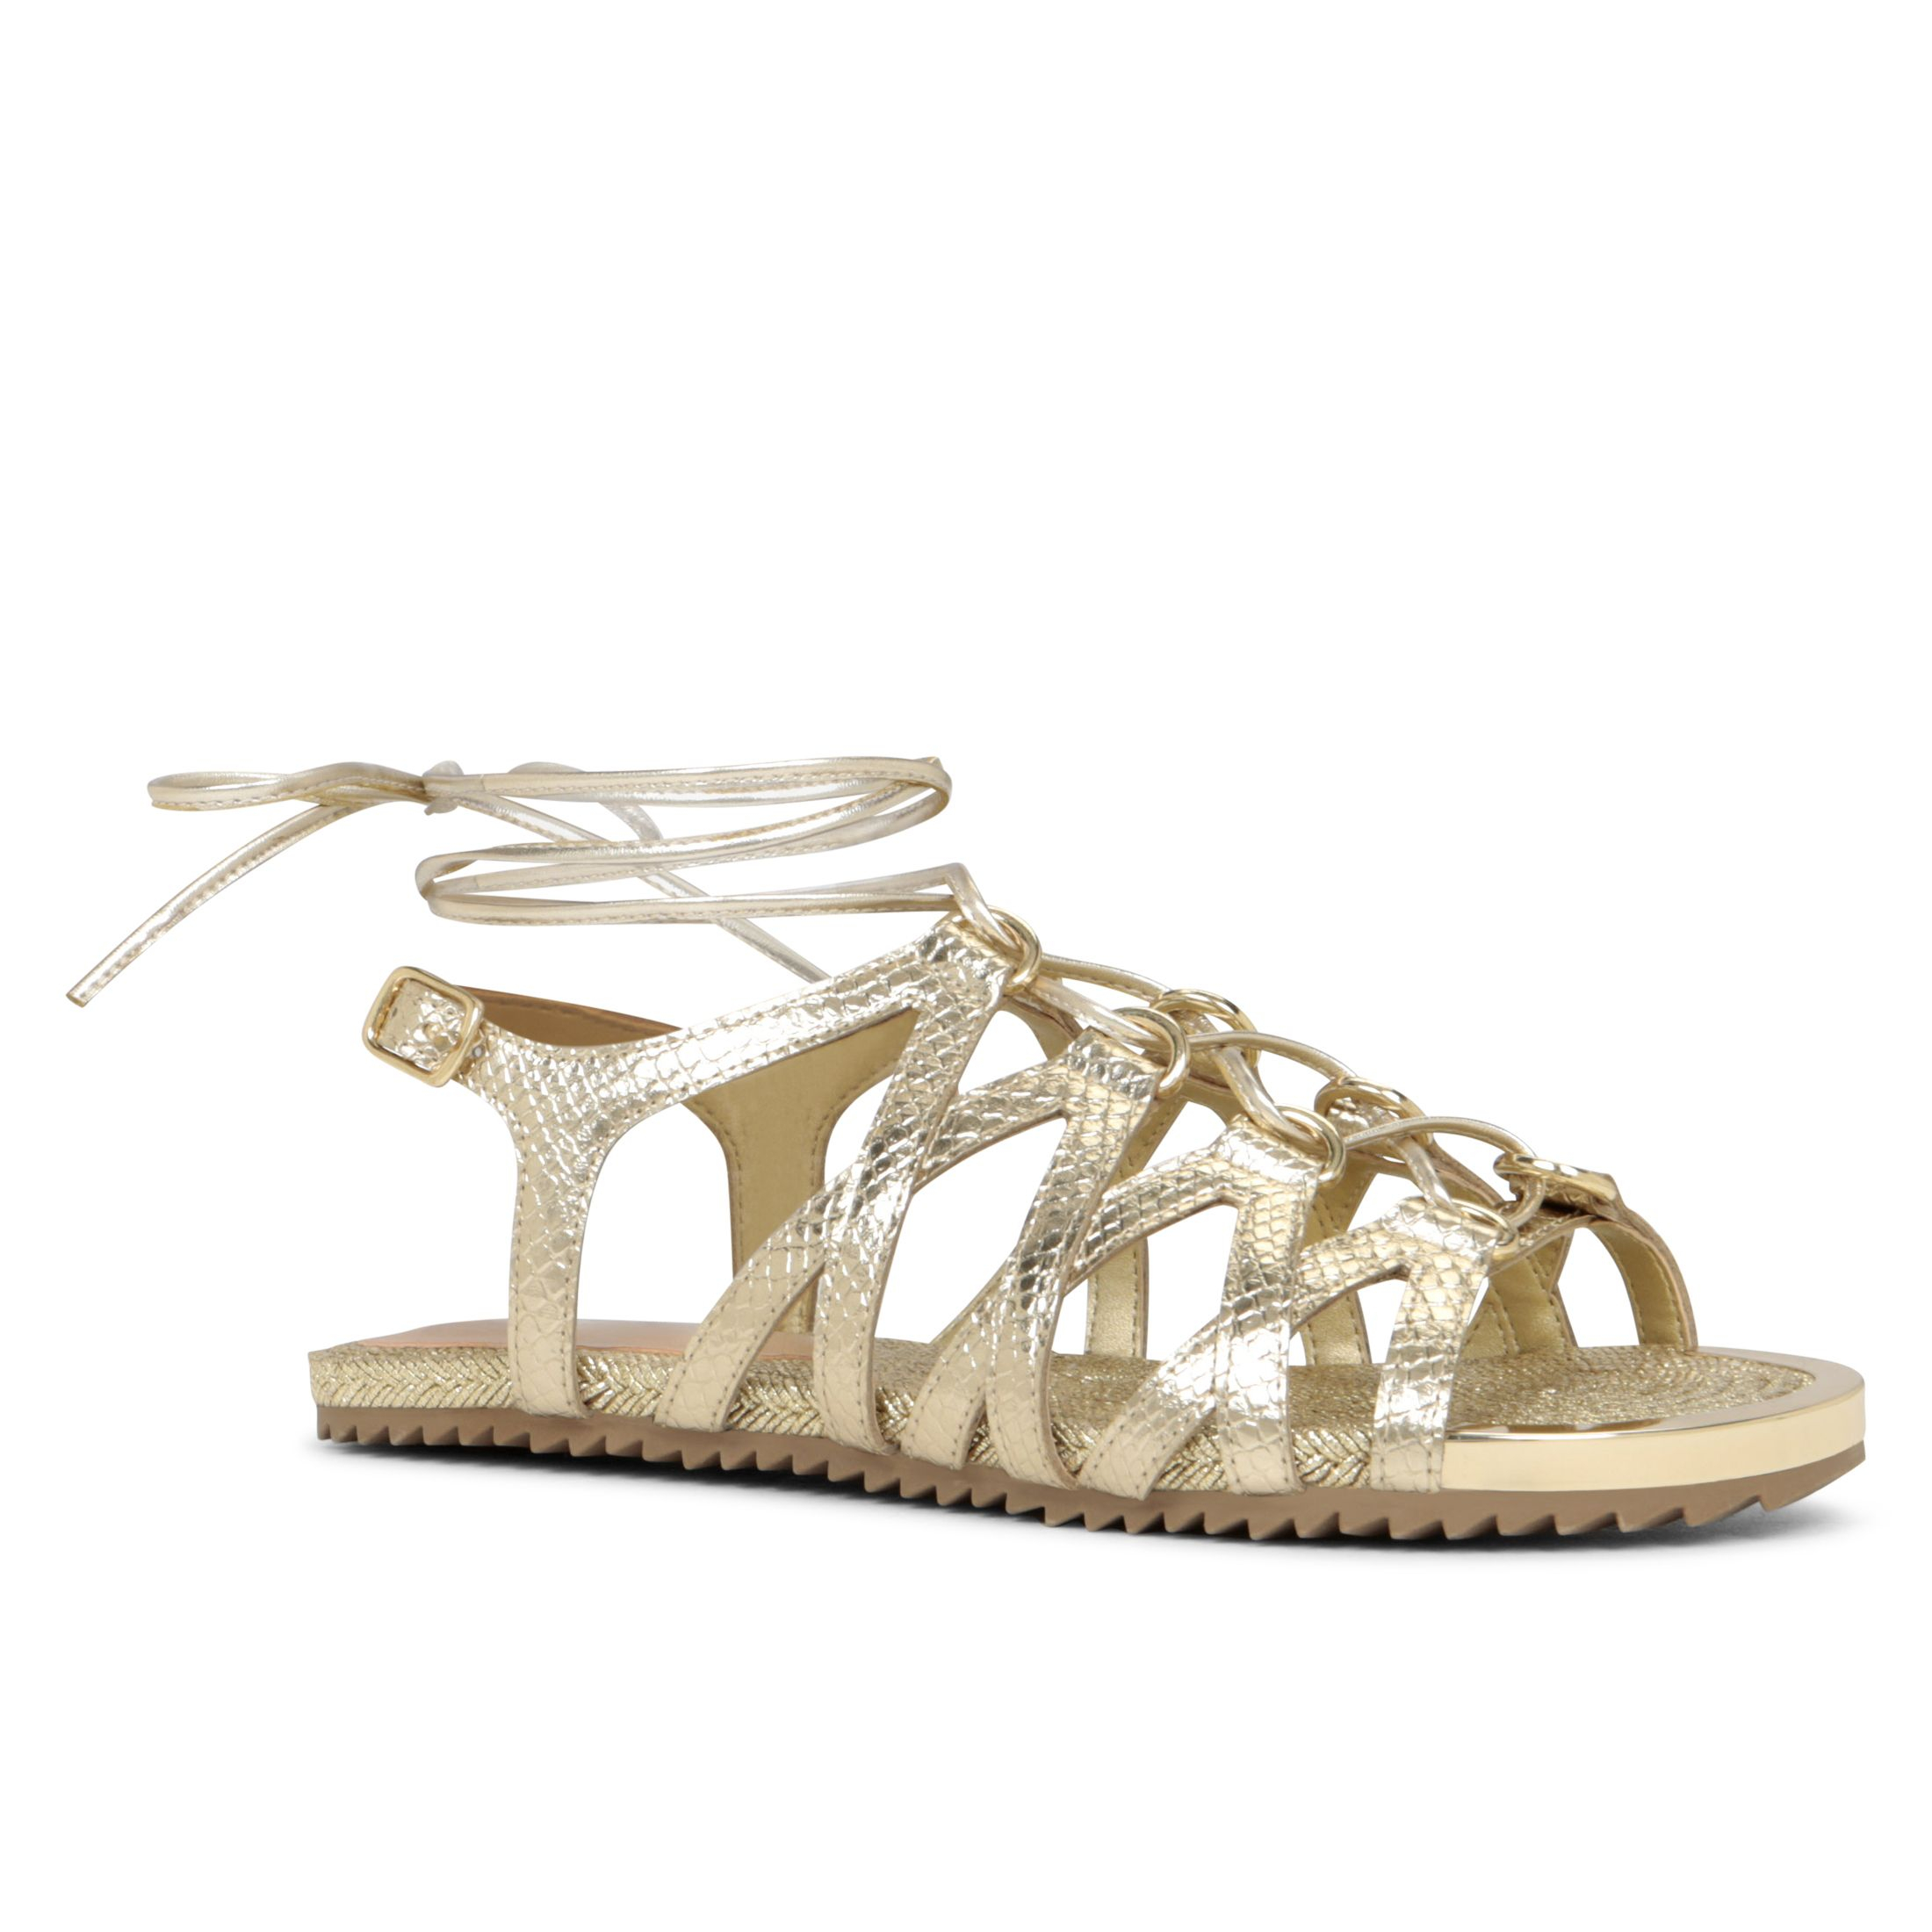 Aldo Lidia Lace Up Flat Sandals in Gold | Lyst